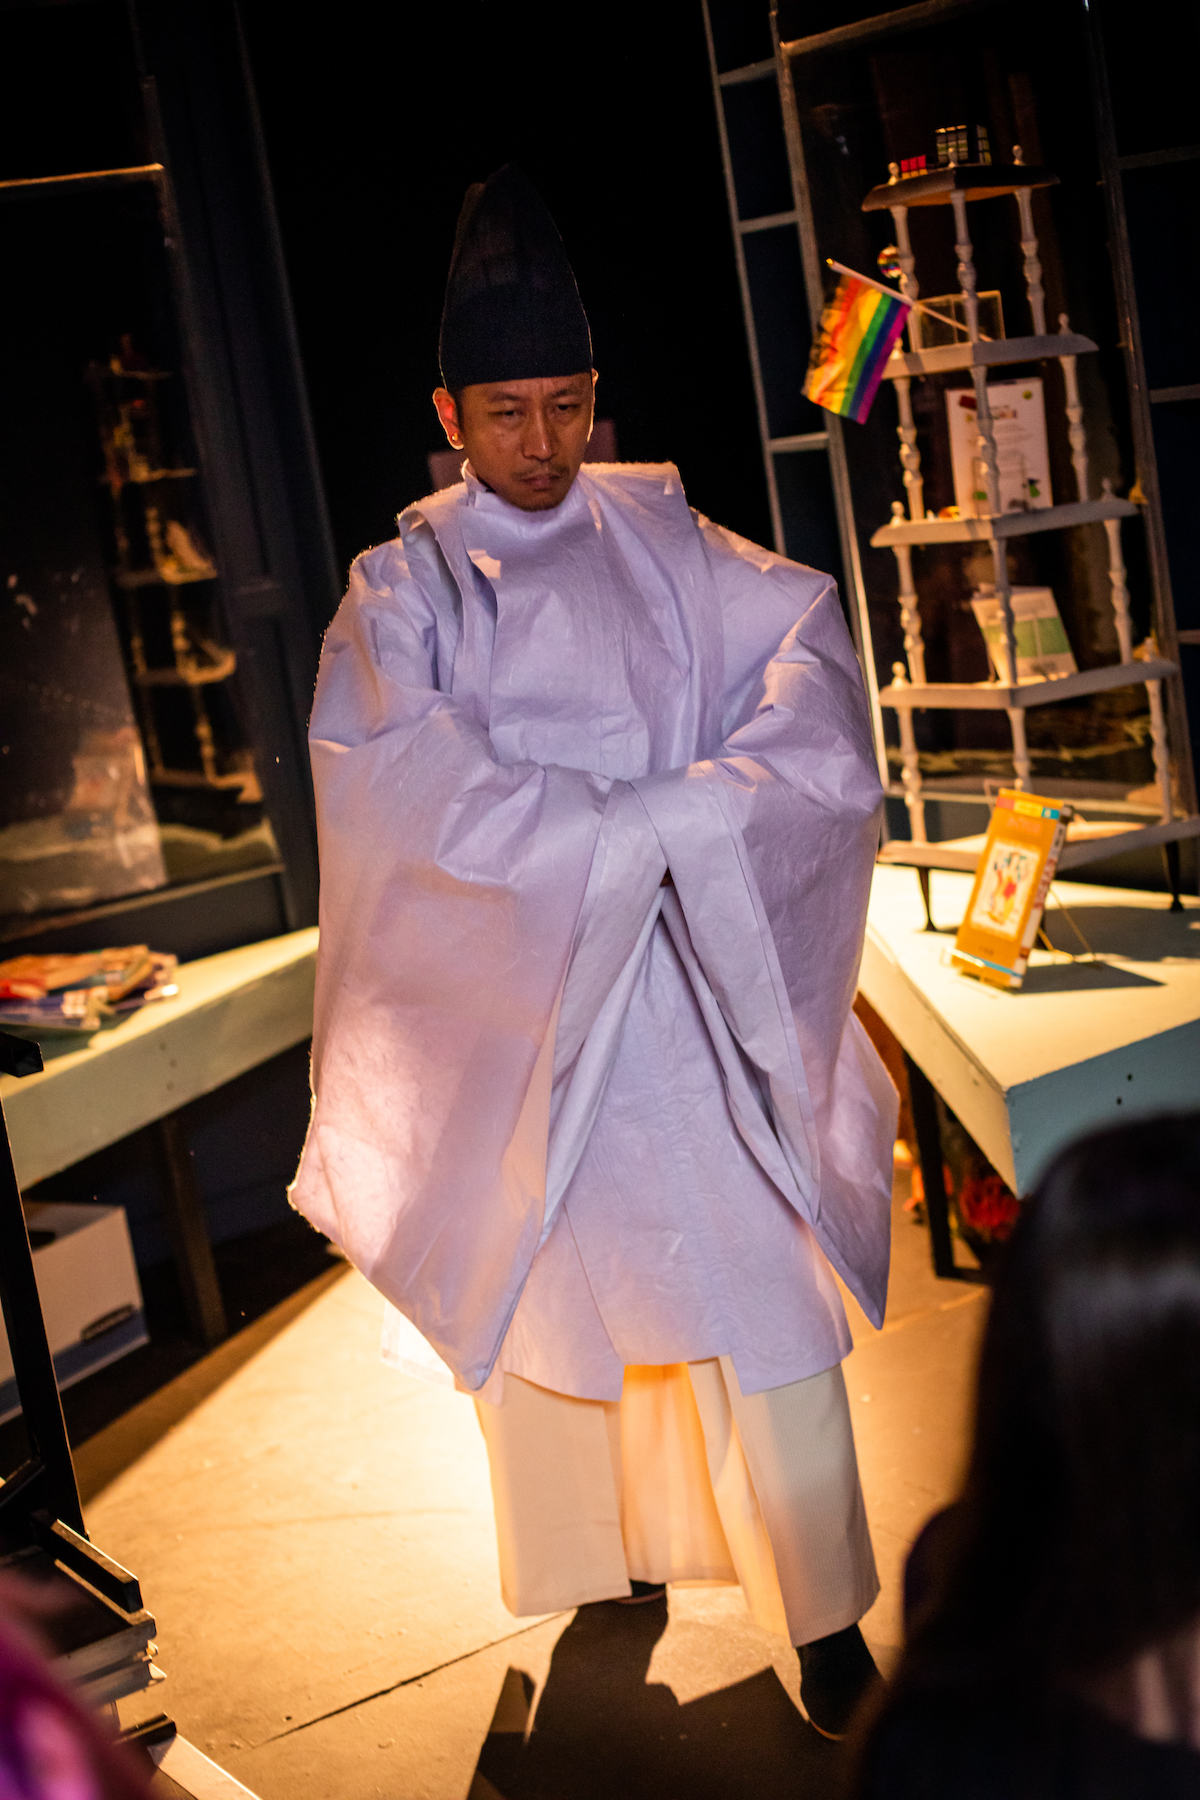 A performer in a white kimono and black hat enters, backlit with bookshelves behind him